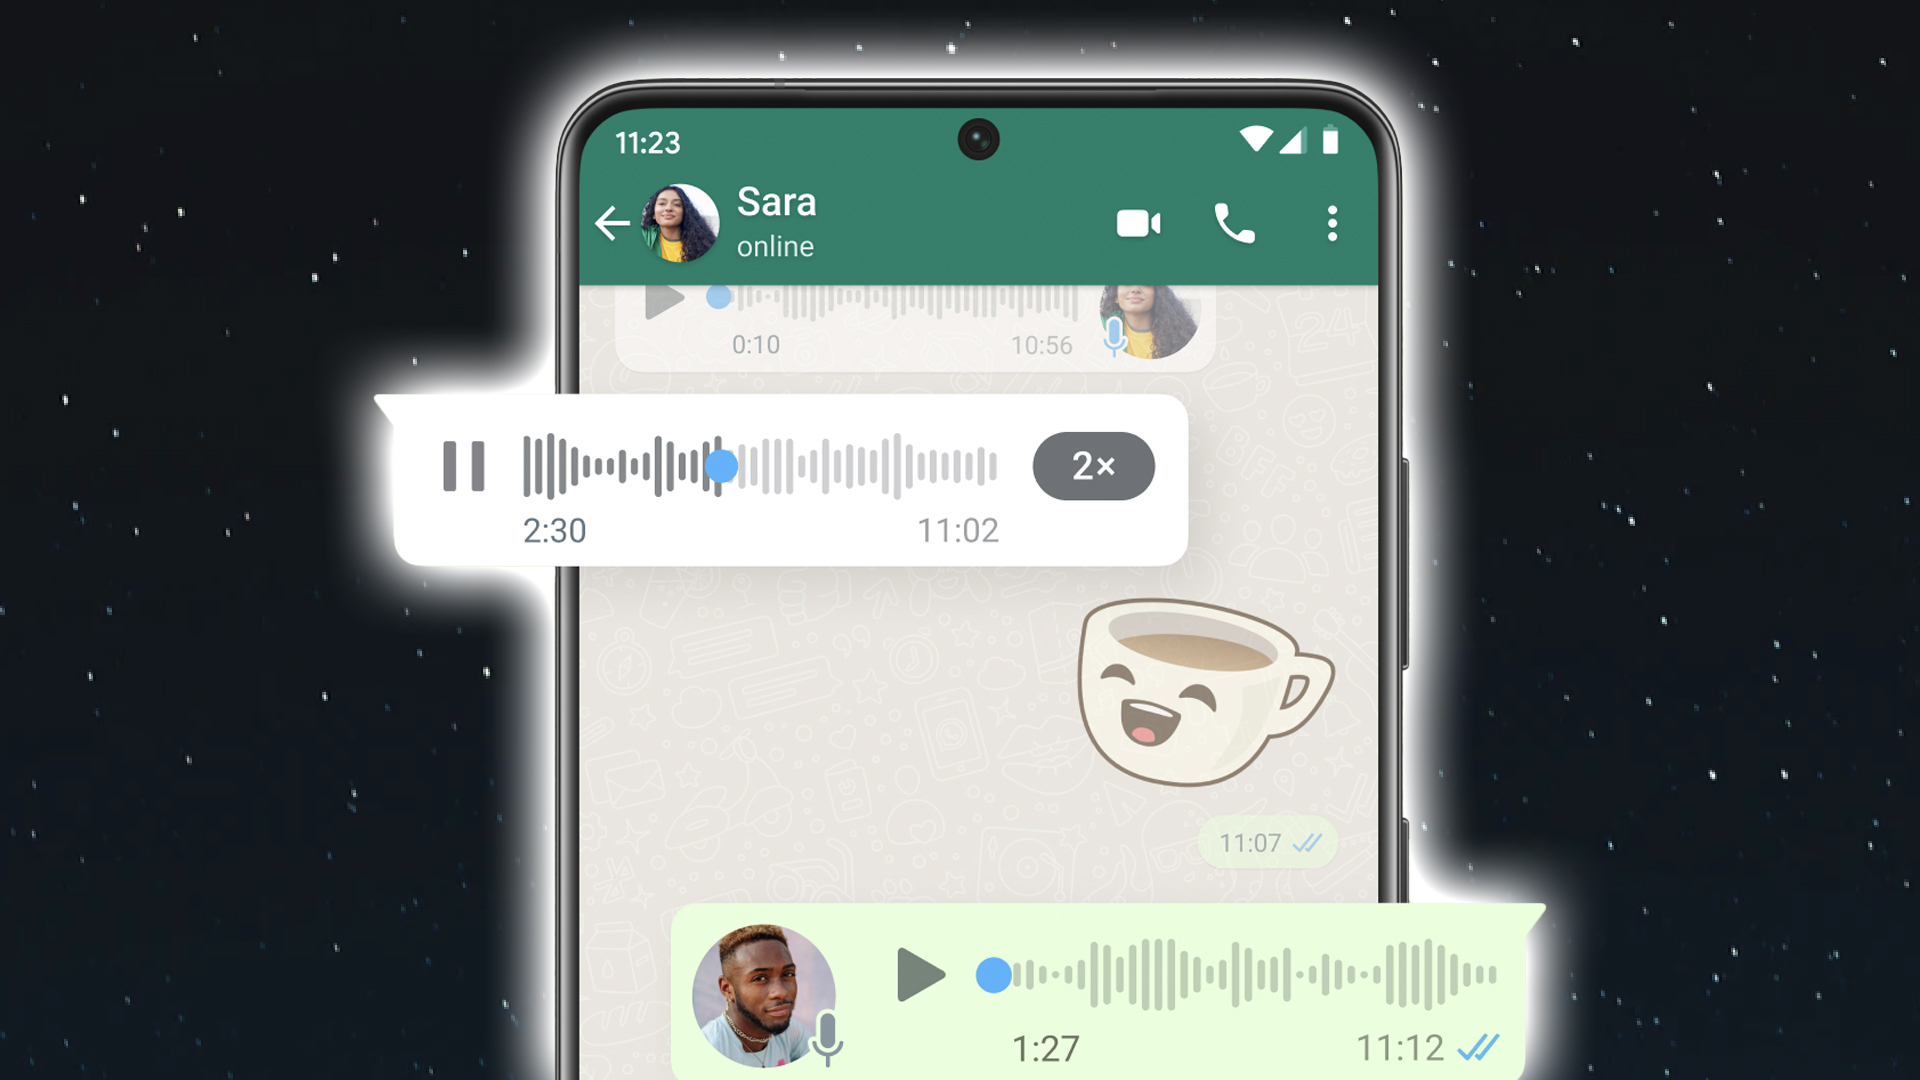 WhatsApp’s new ‘Stealth Mode’ lets you SECRETLY use chat app